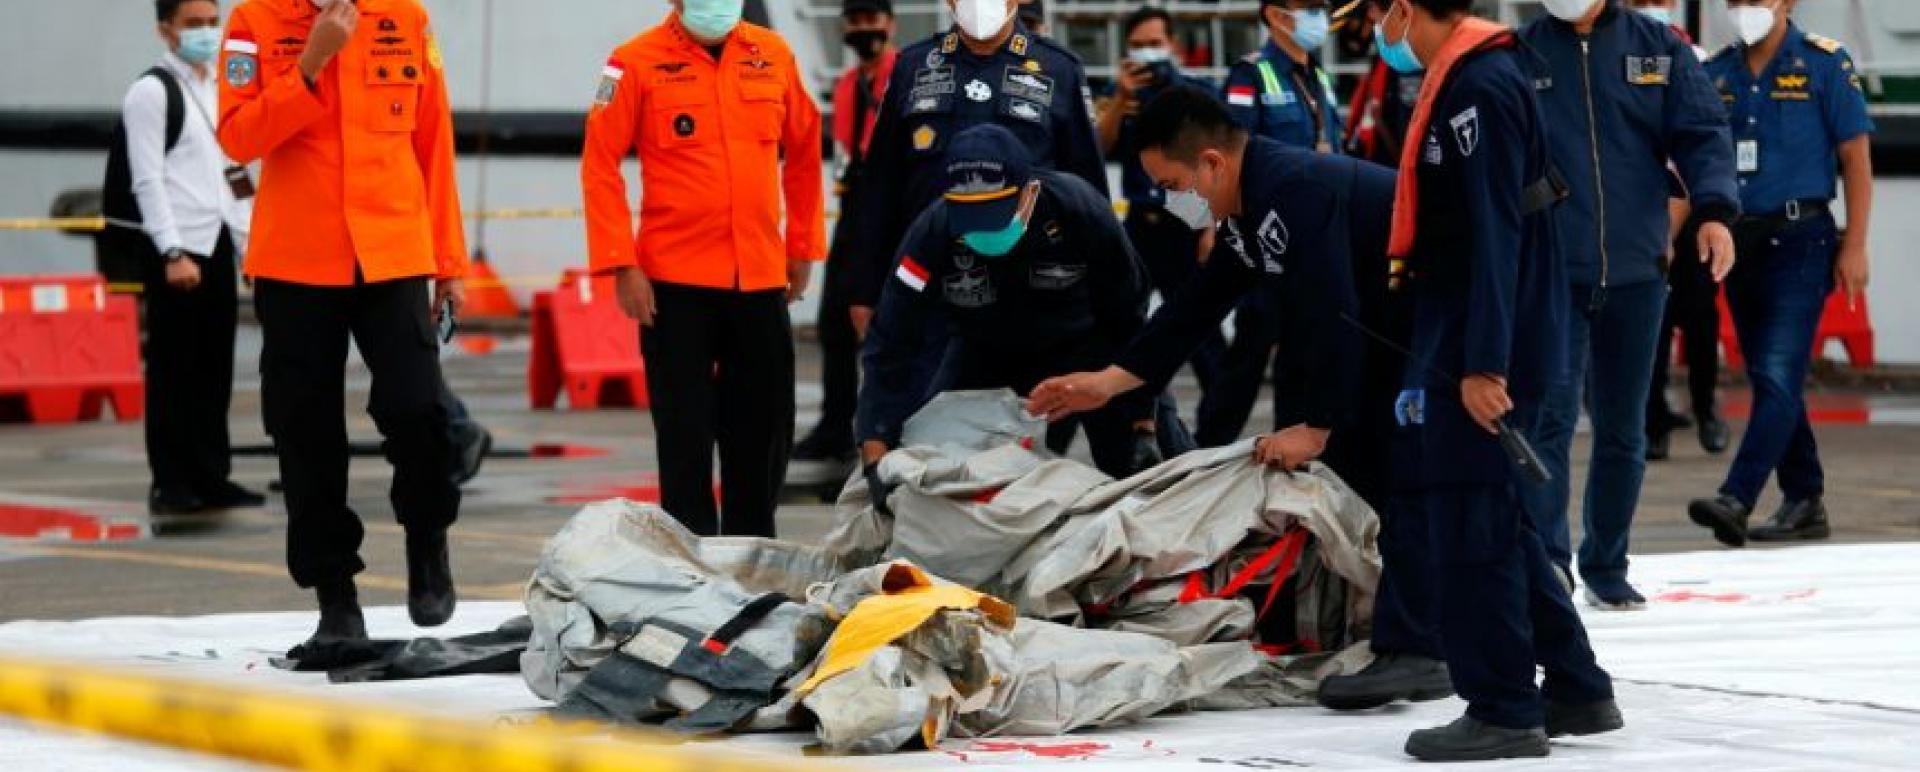 Indonesian rescue members carry what is believed to be remains from Sriwijaya Air Flight SJ182 on Jan 10, 2021.PHOTO: REUTERS